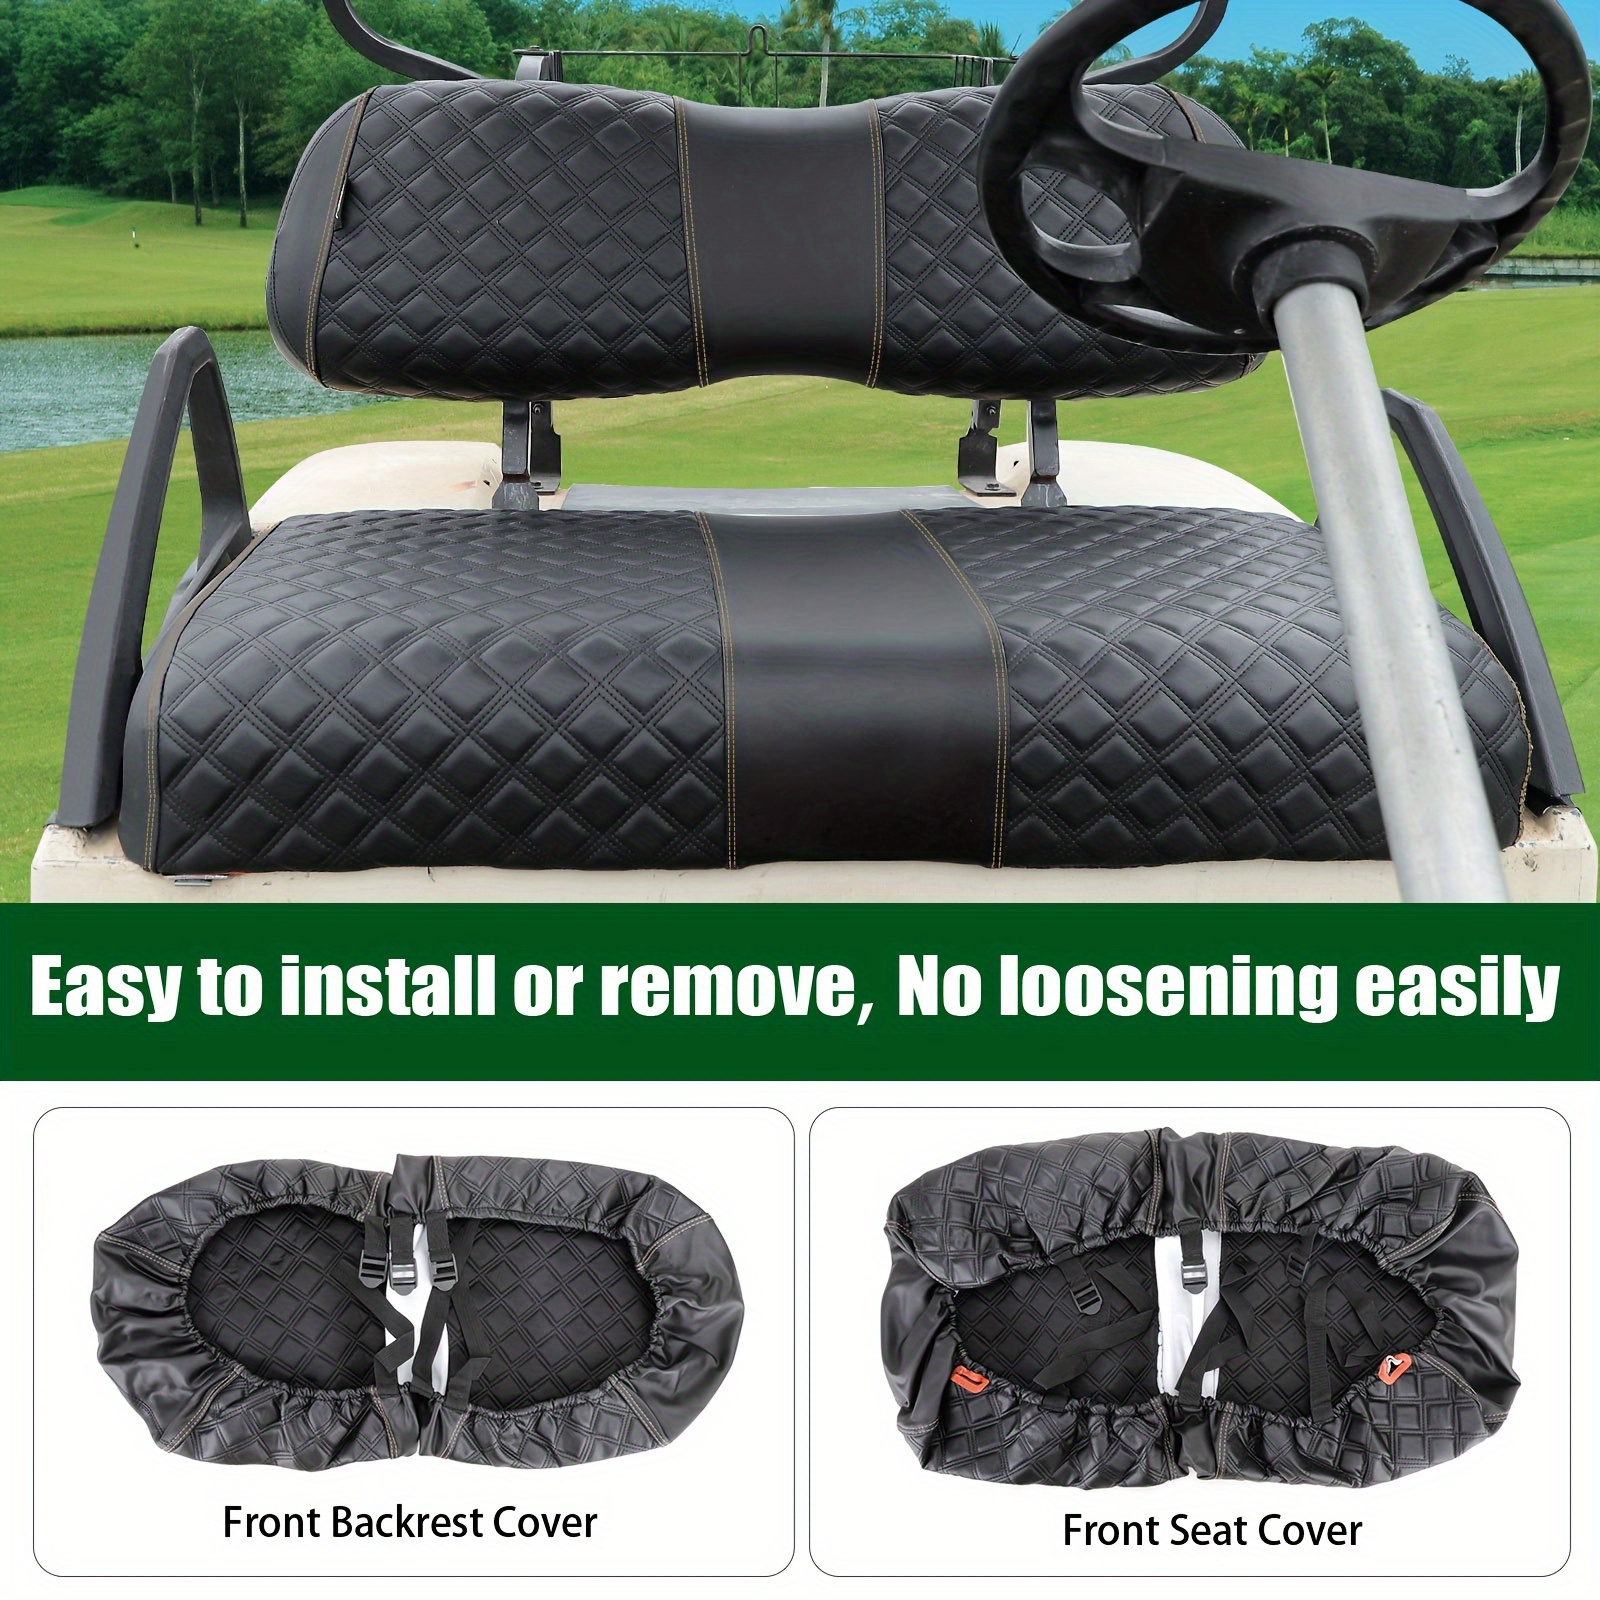 

Roykaw Golf Cart Seat Covers Kit Fit For Ds Oem Ordinary Front Seat Cushion, Marine Grade Vinyl Material/more Sturdy And Comfortable, Breathable & Easy To Clean, Well Made Quality